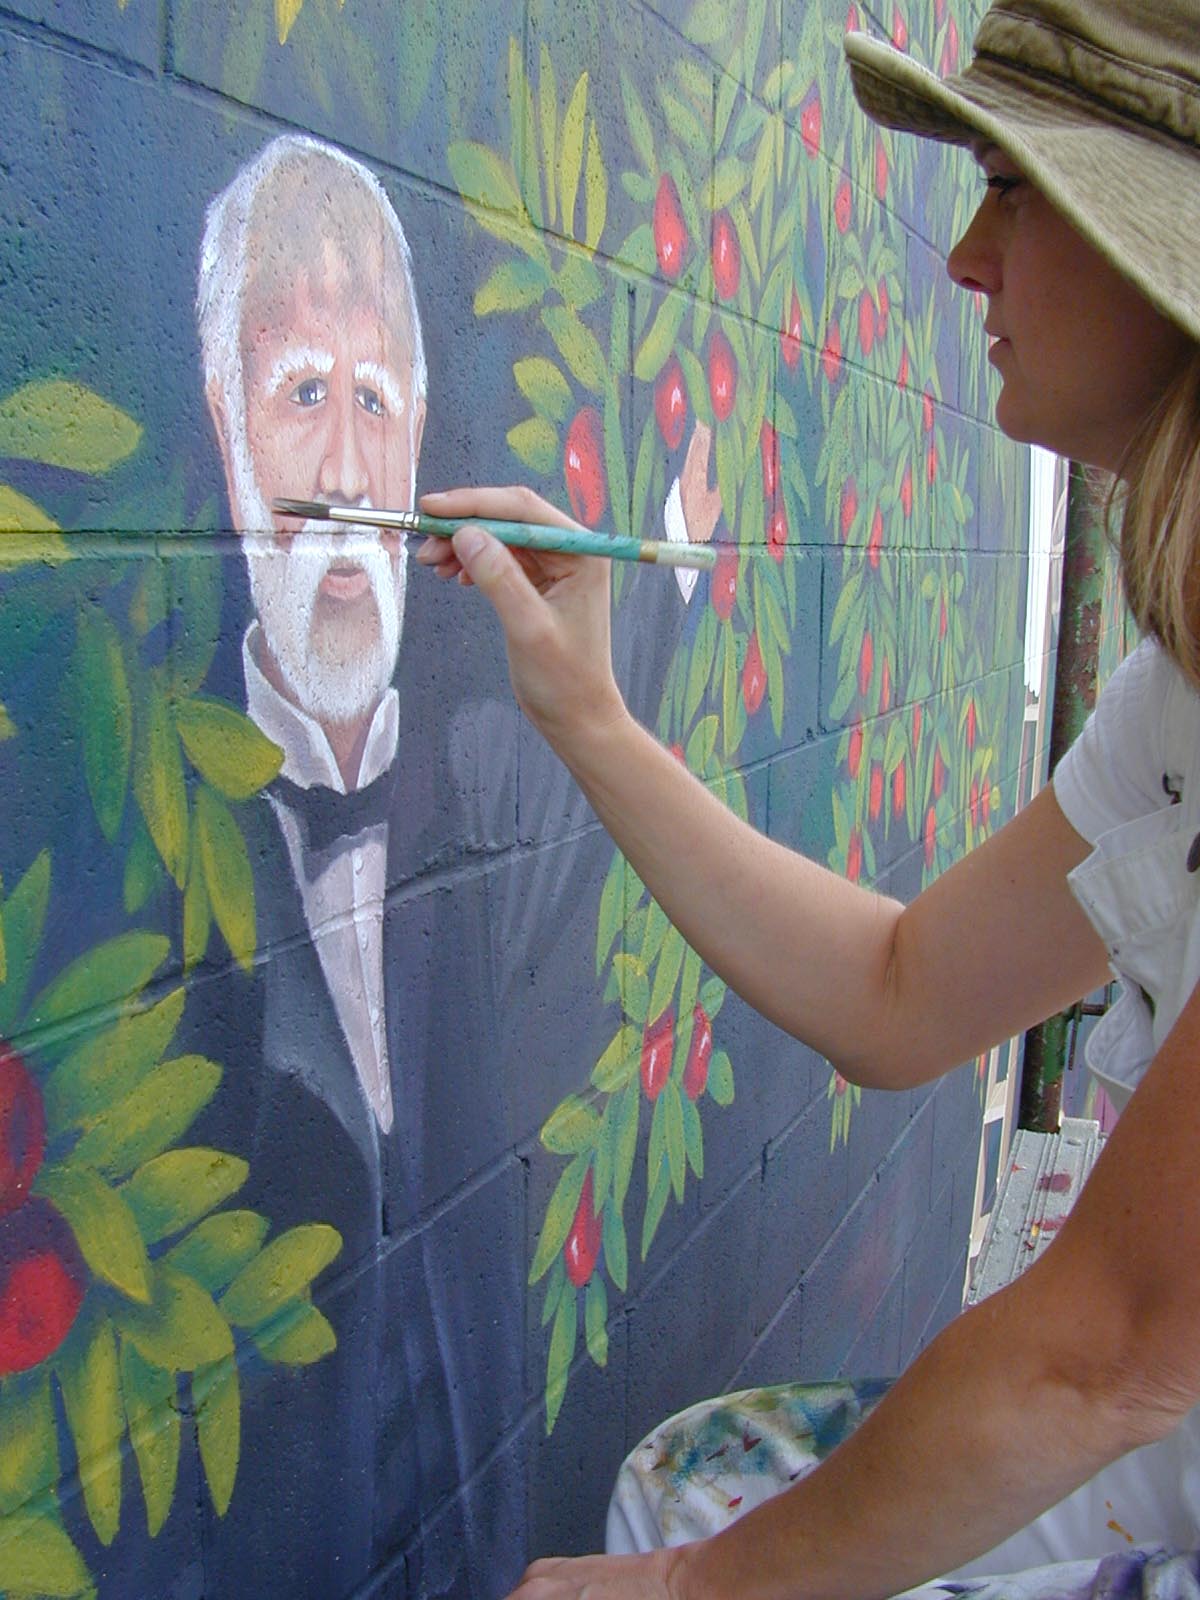 Steiger used care on the mural faces.